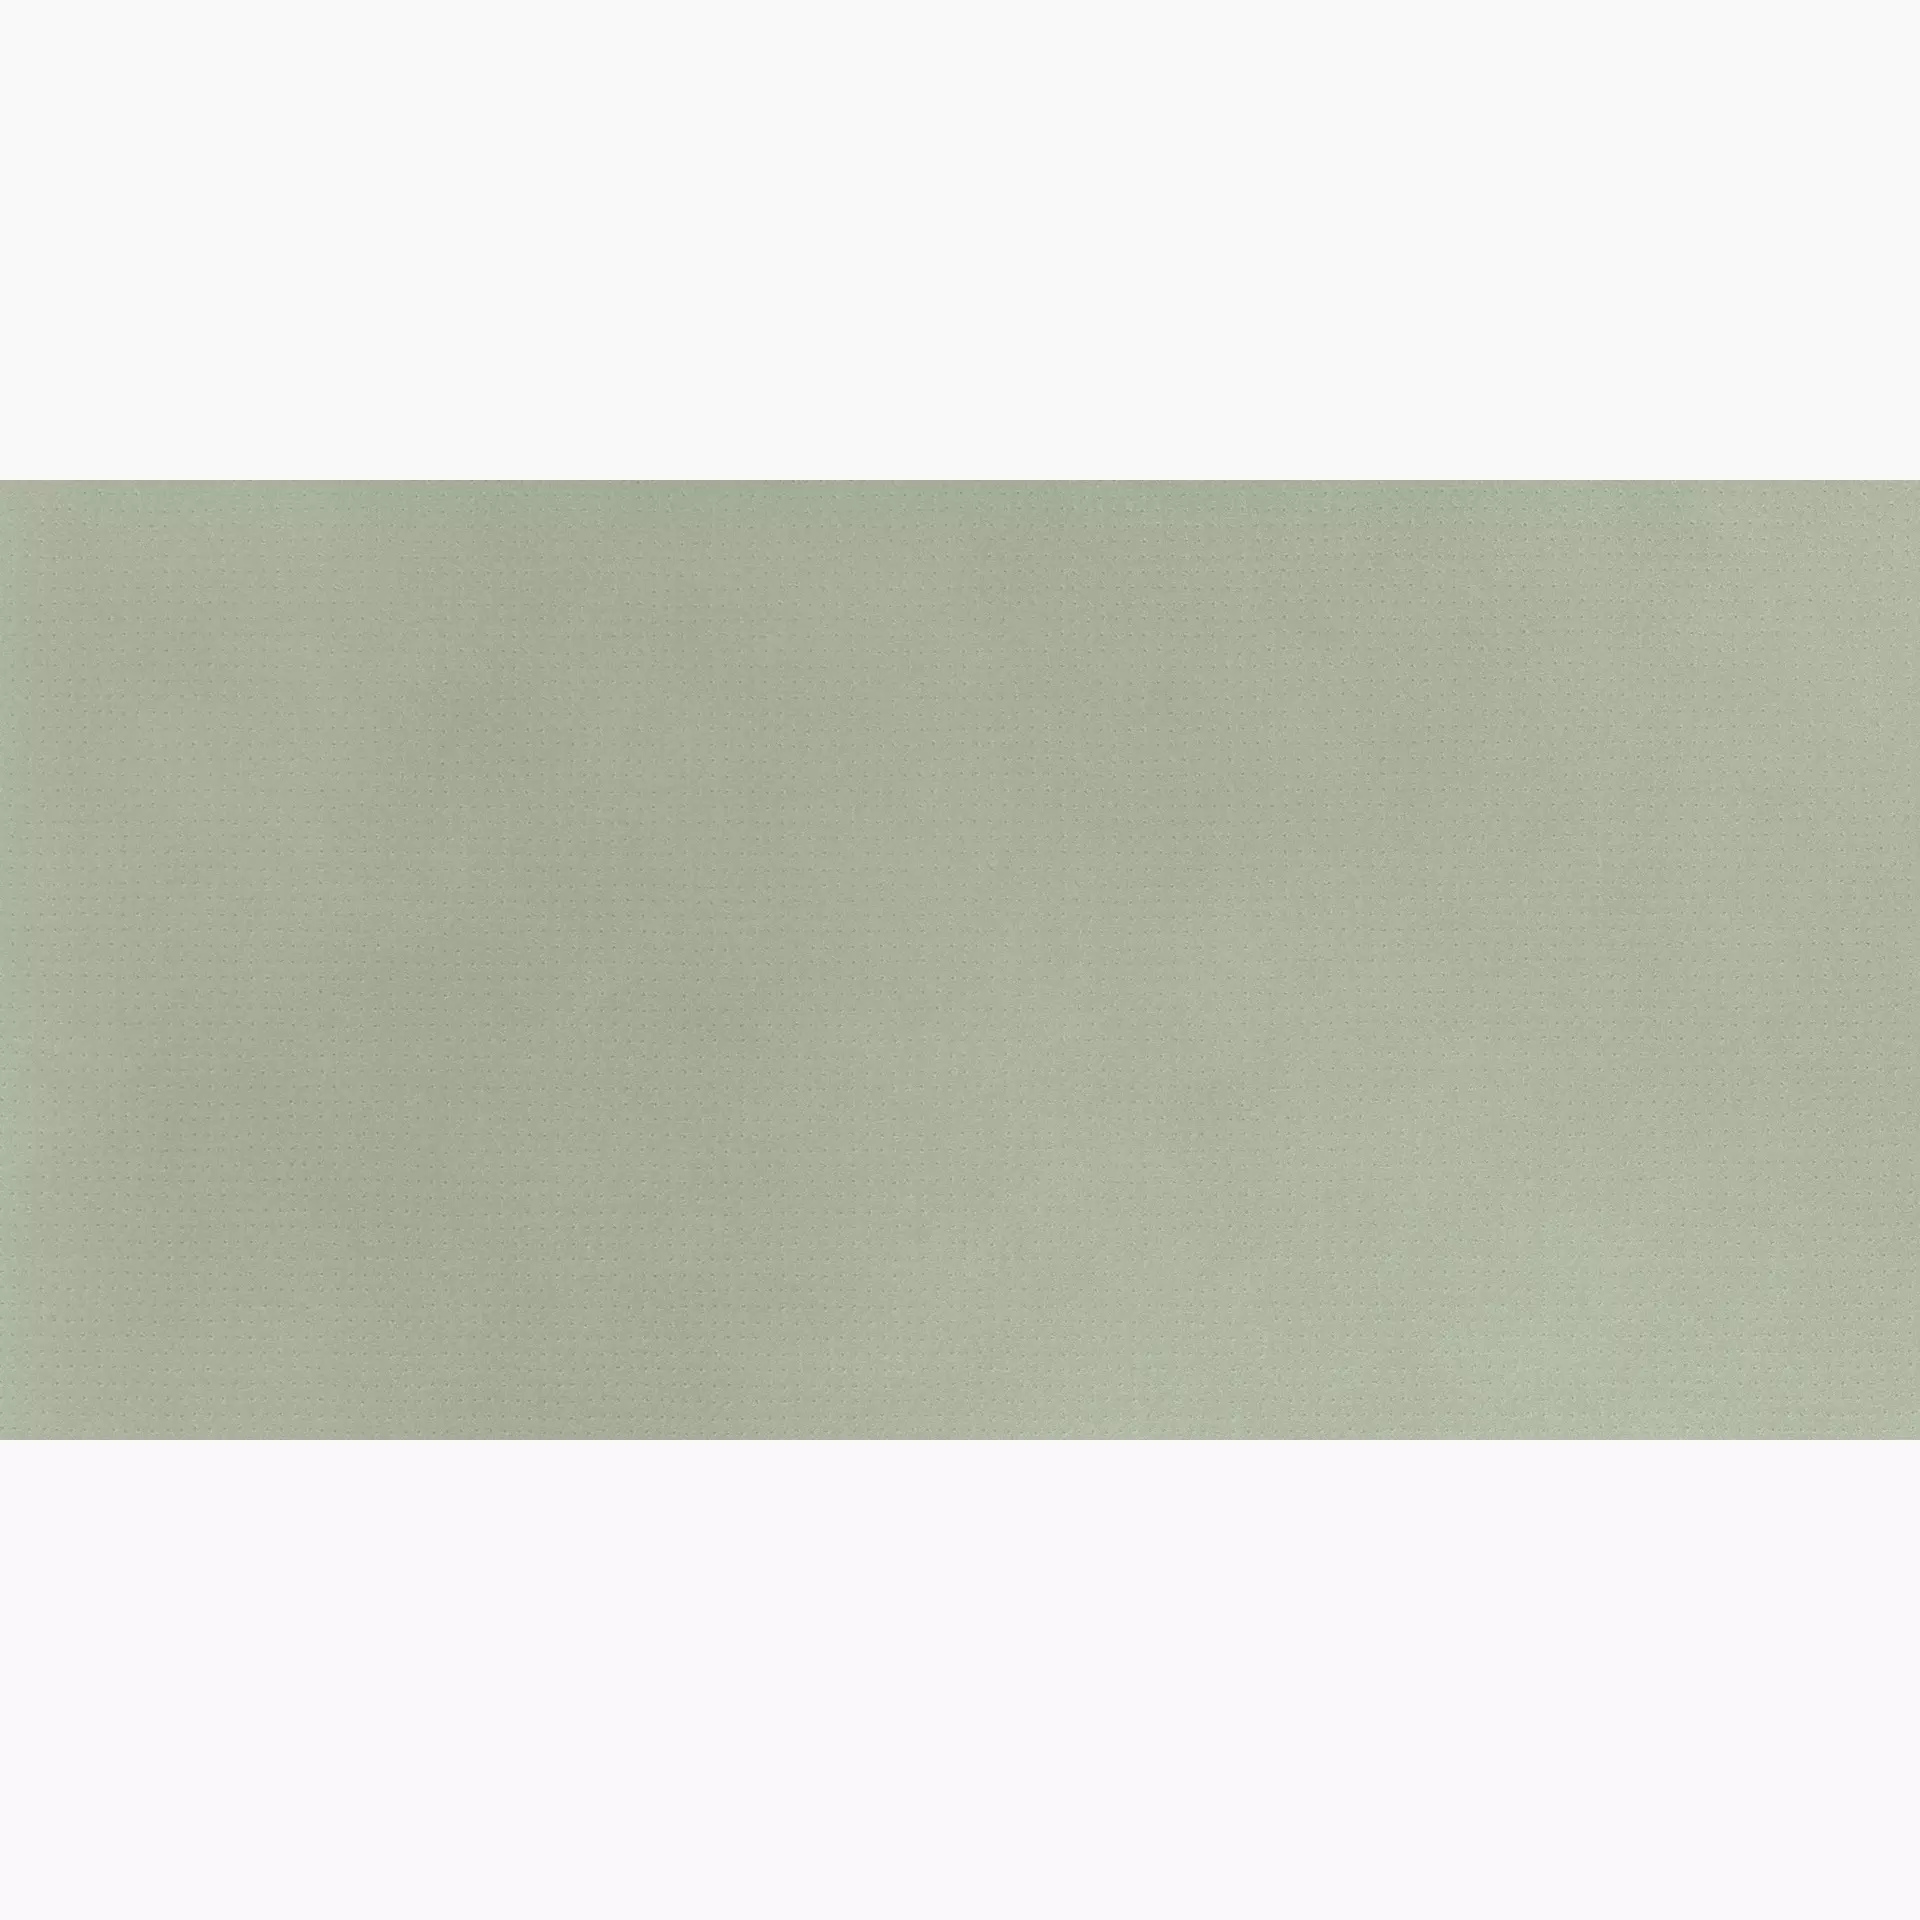 Gigacer Pointille Vert Anglais Pale 6LCSPOINT6012032042 60x120cm 6mm